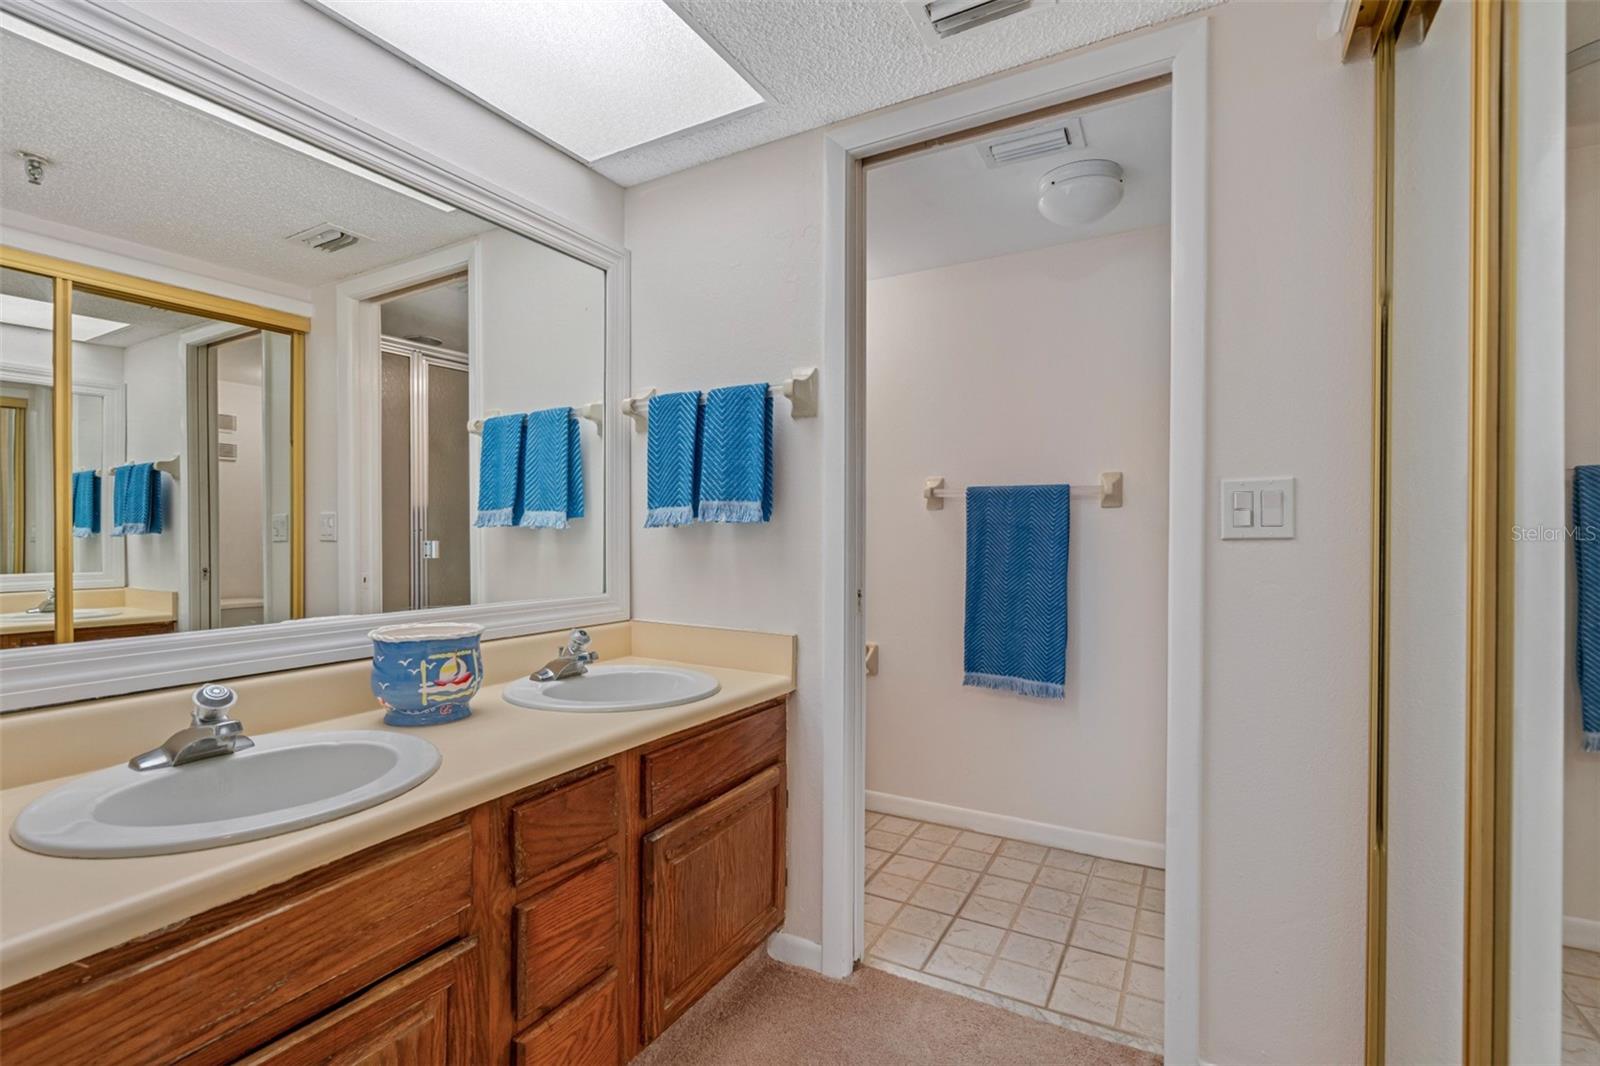 .. Master Suite has a Vanity Area with double sinks and Mirrored Closets  - Plus Shower and Privacy Room. Folks who Remodel Enlarge Walk in Shower Area by taking half of Closet space.